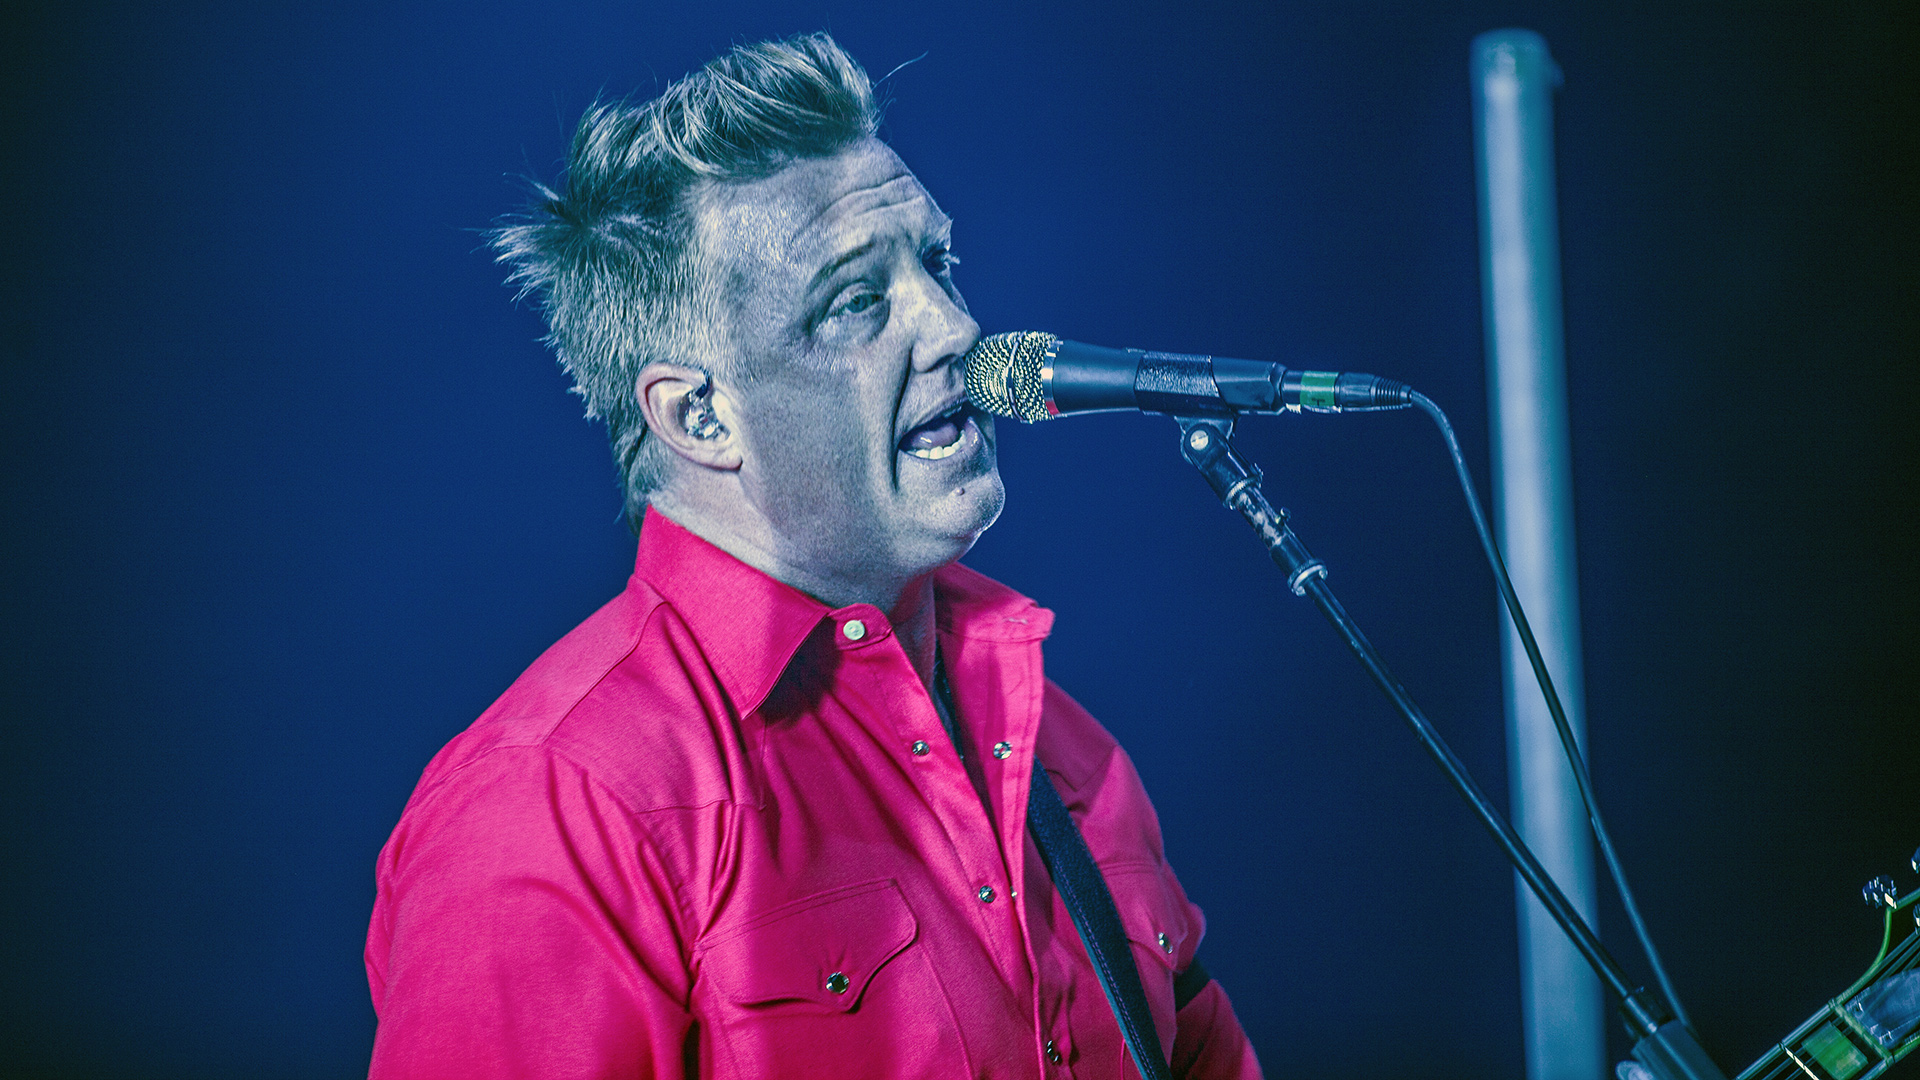 Queens Of The Stone Age live am 11. November 2017 in Berlin